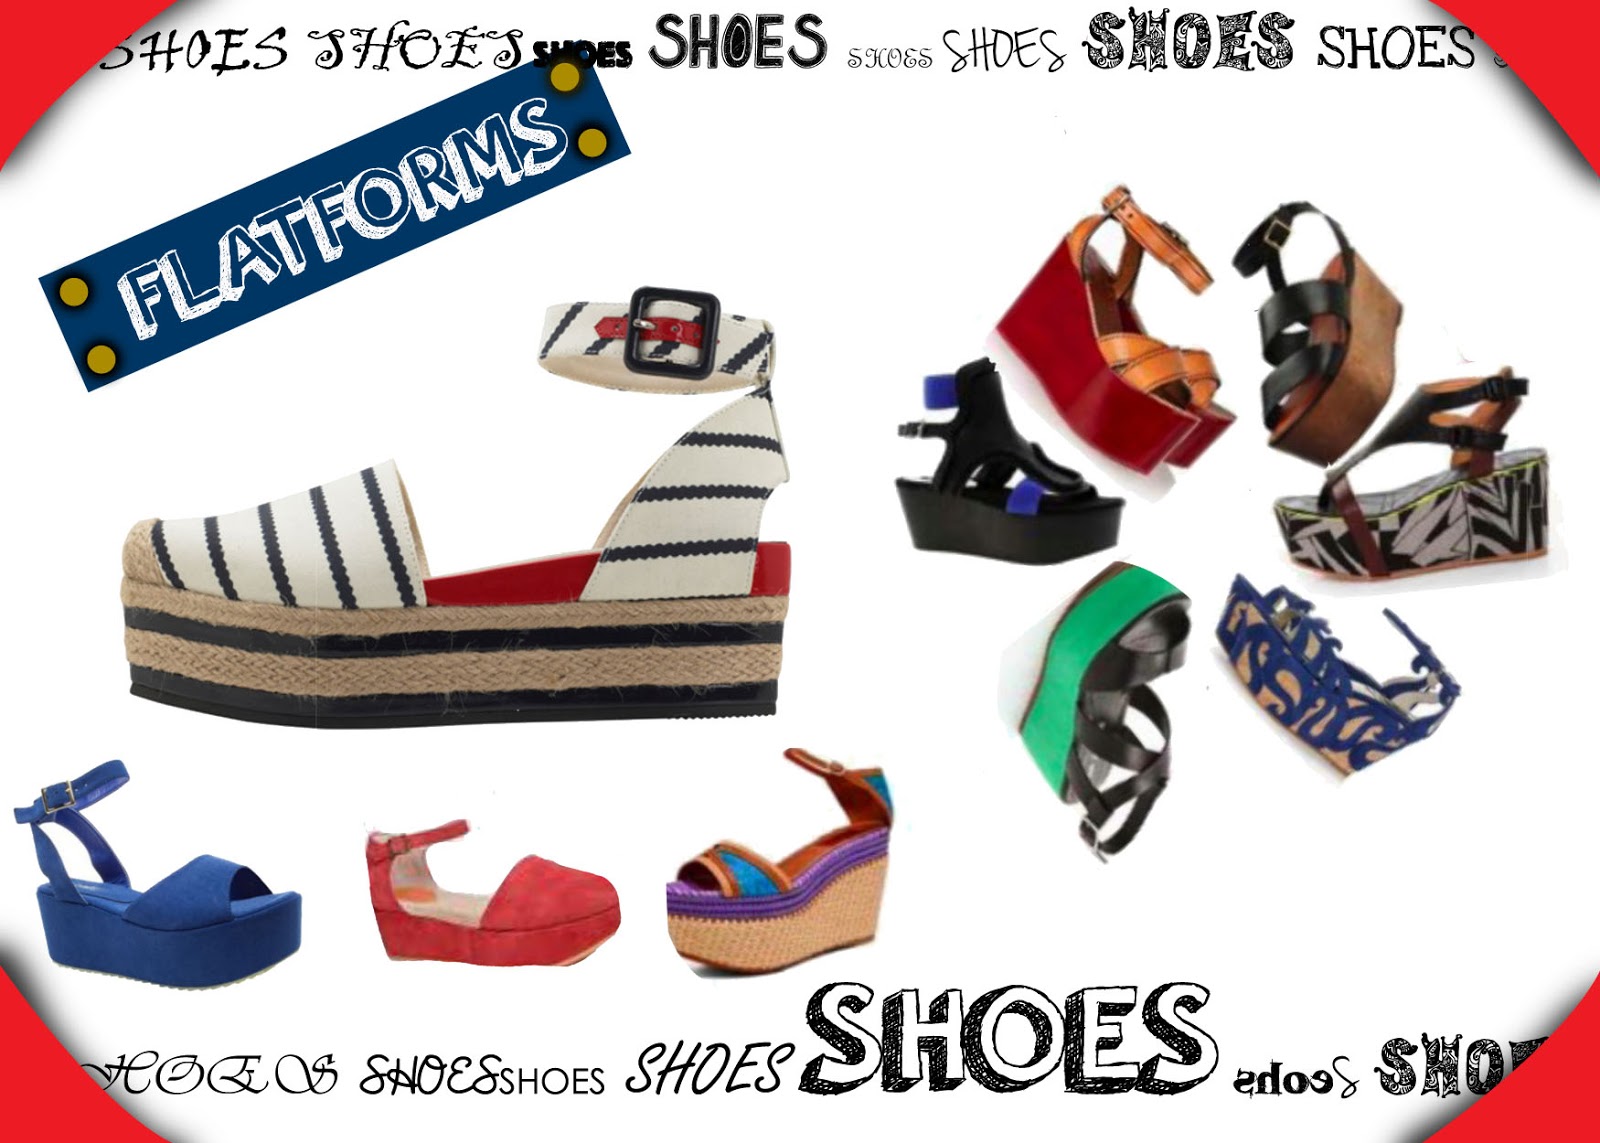 MISYELLE STORE BLOG: Flatforms are coming!